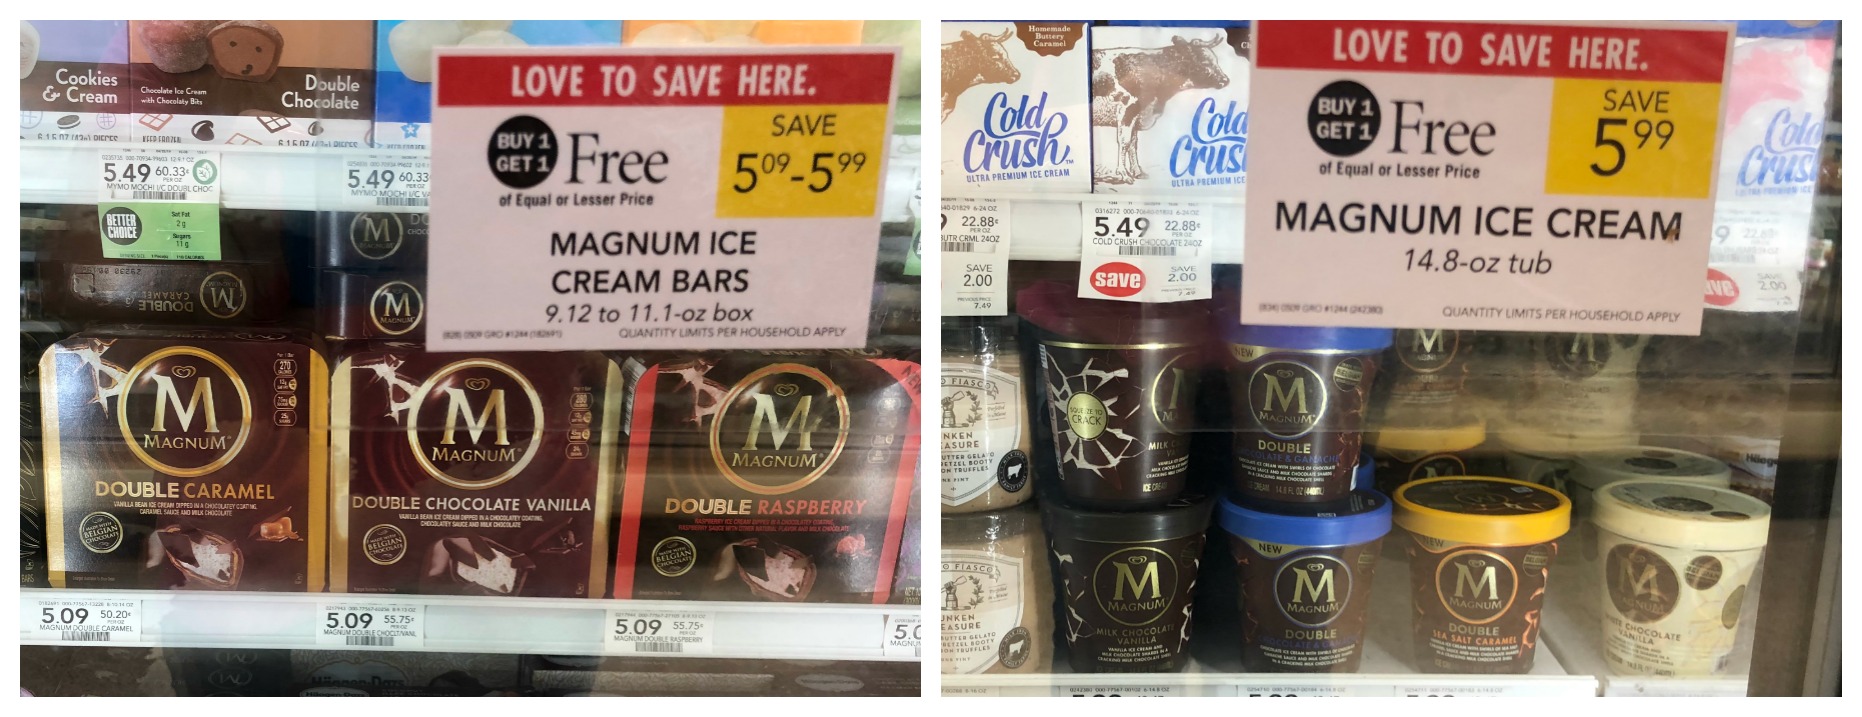 Stock Up On Magnum Bars And Tubs During The Publix BOGO Sale - Treats As Low As $1.75! on I Heart Publix